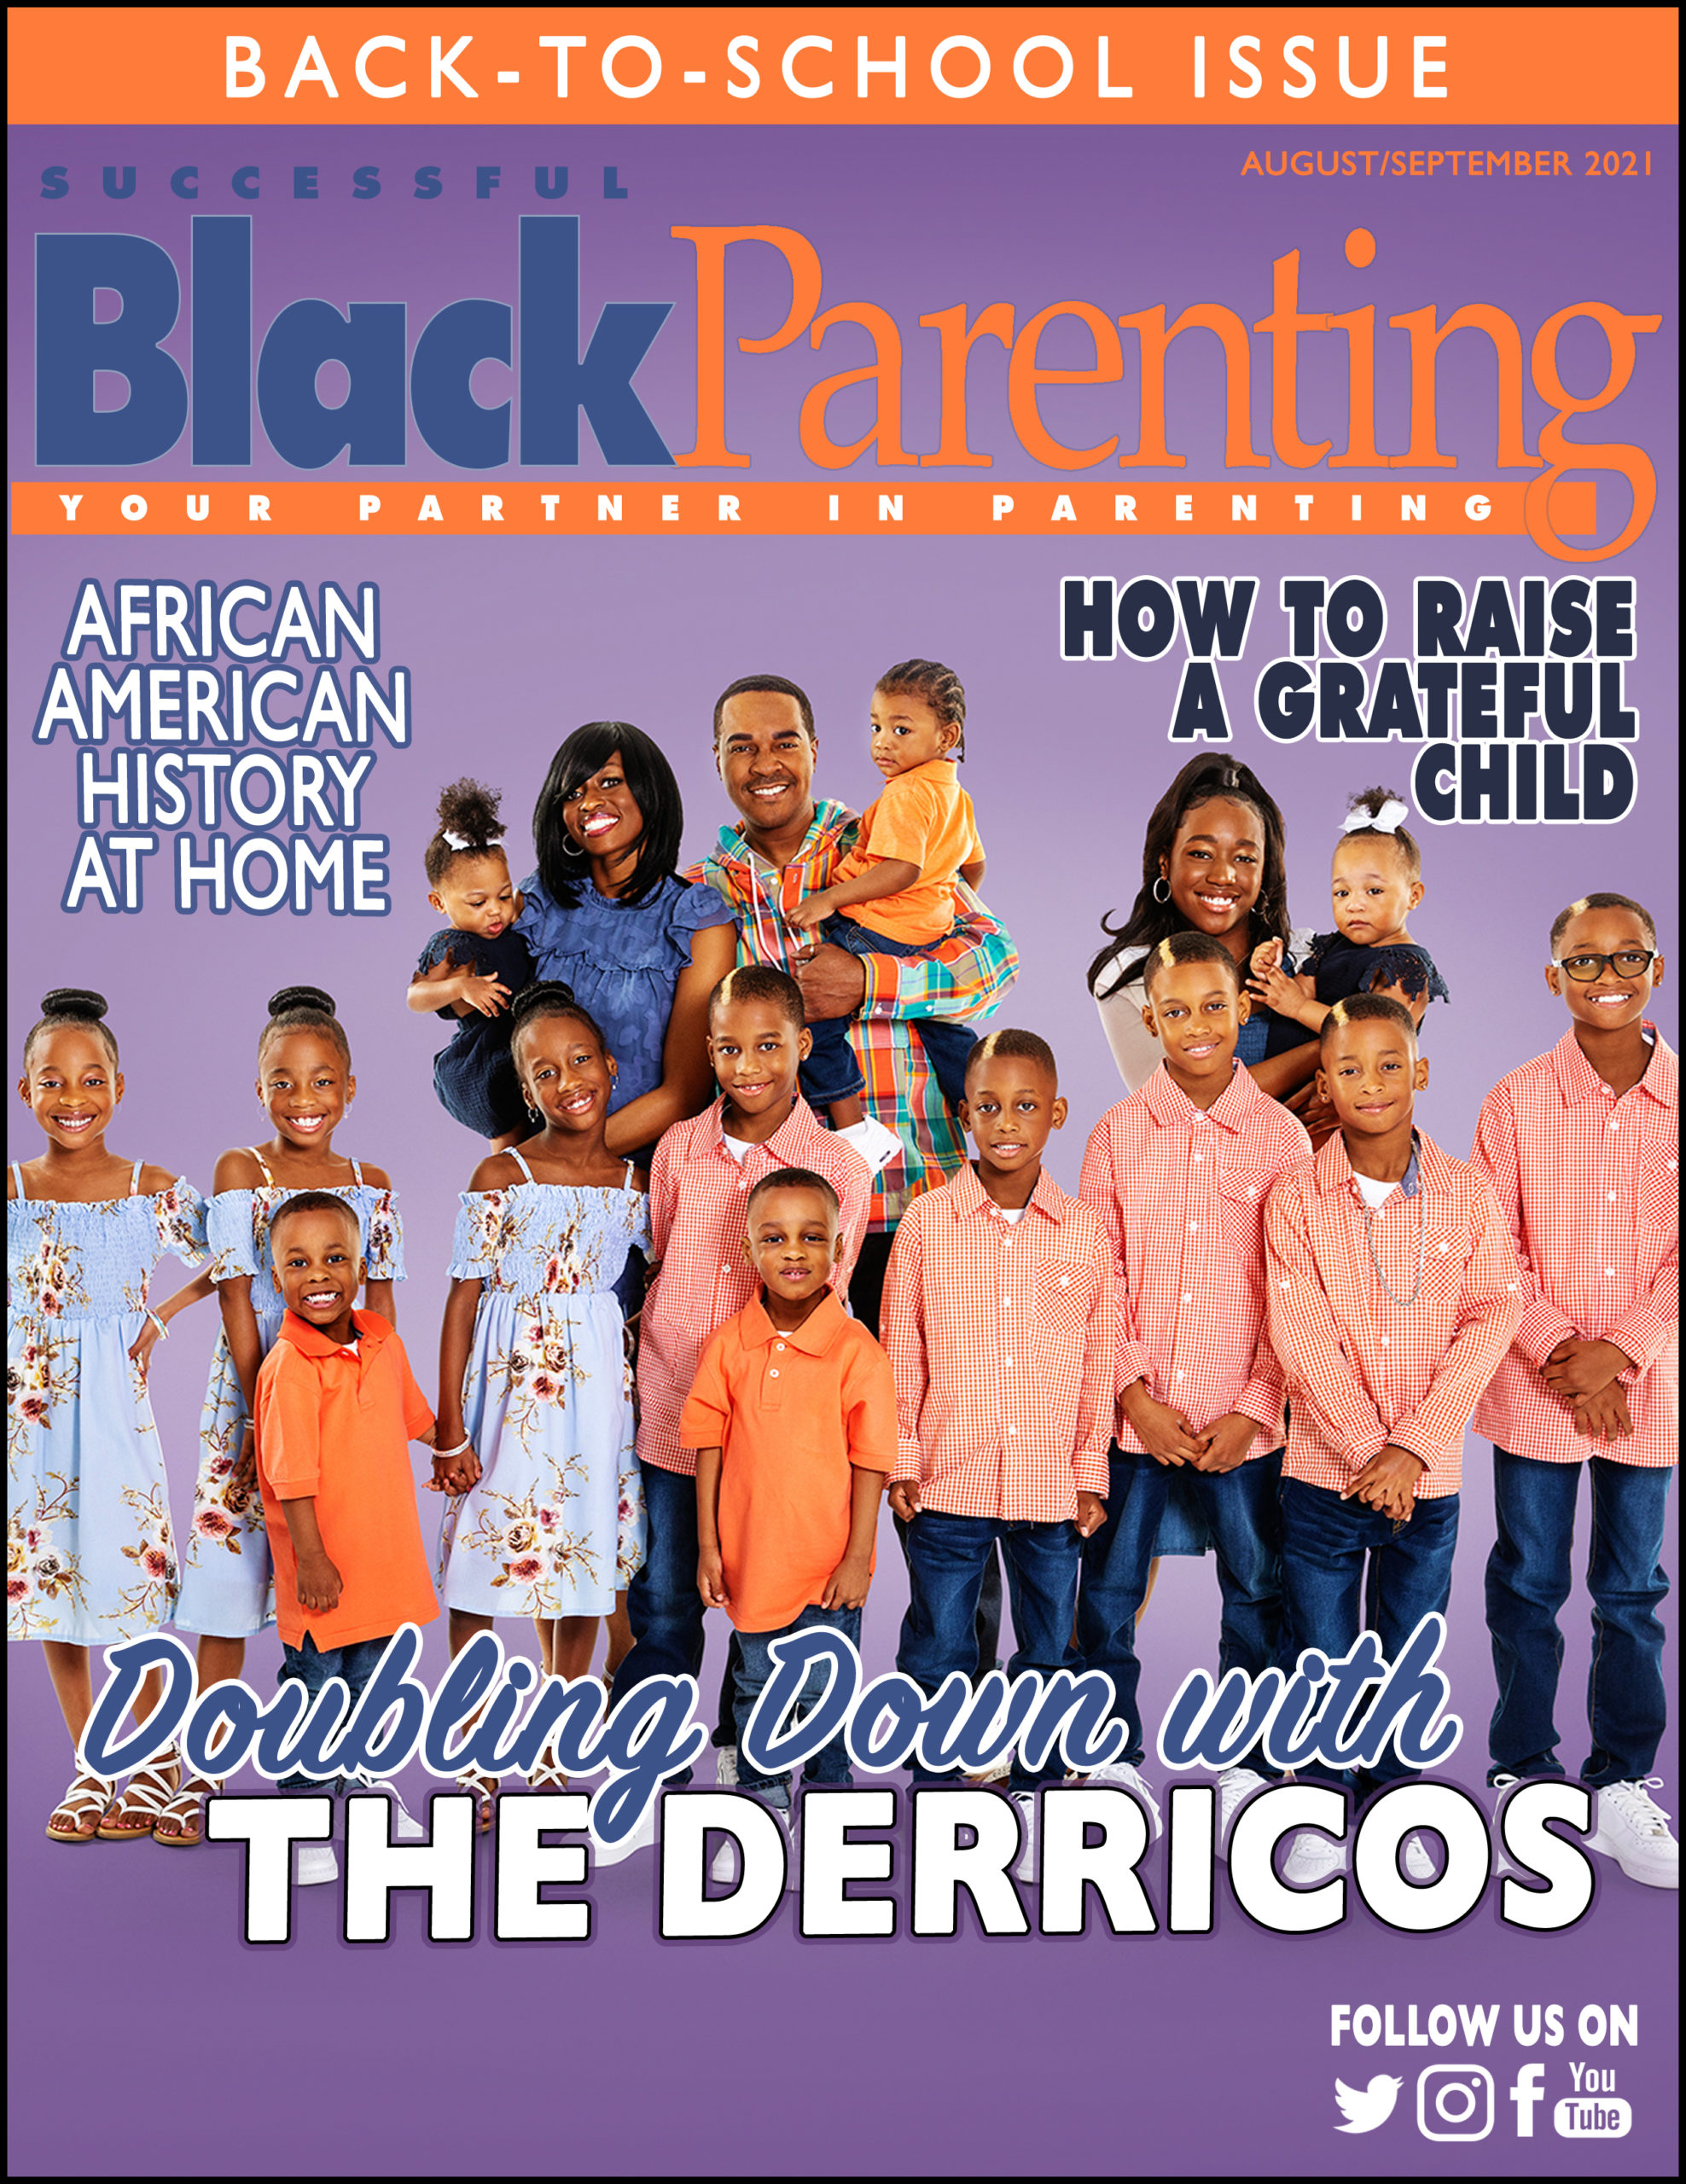 The August September cover for Successful Black Parenting magazine